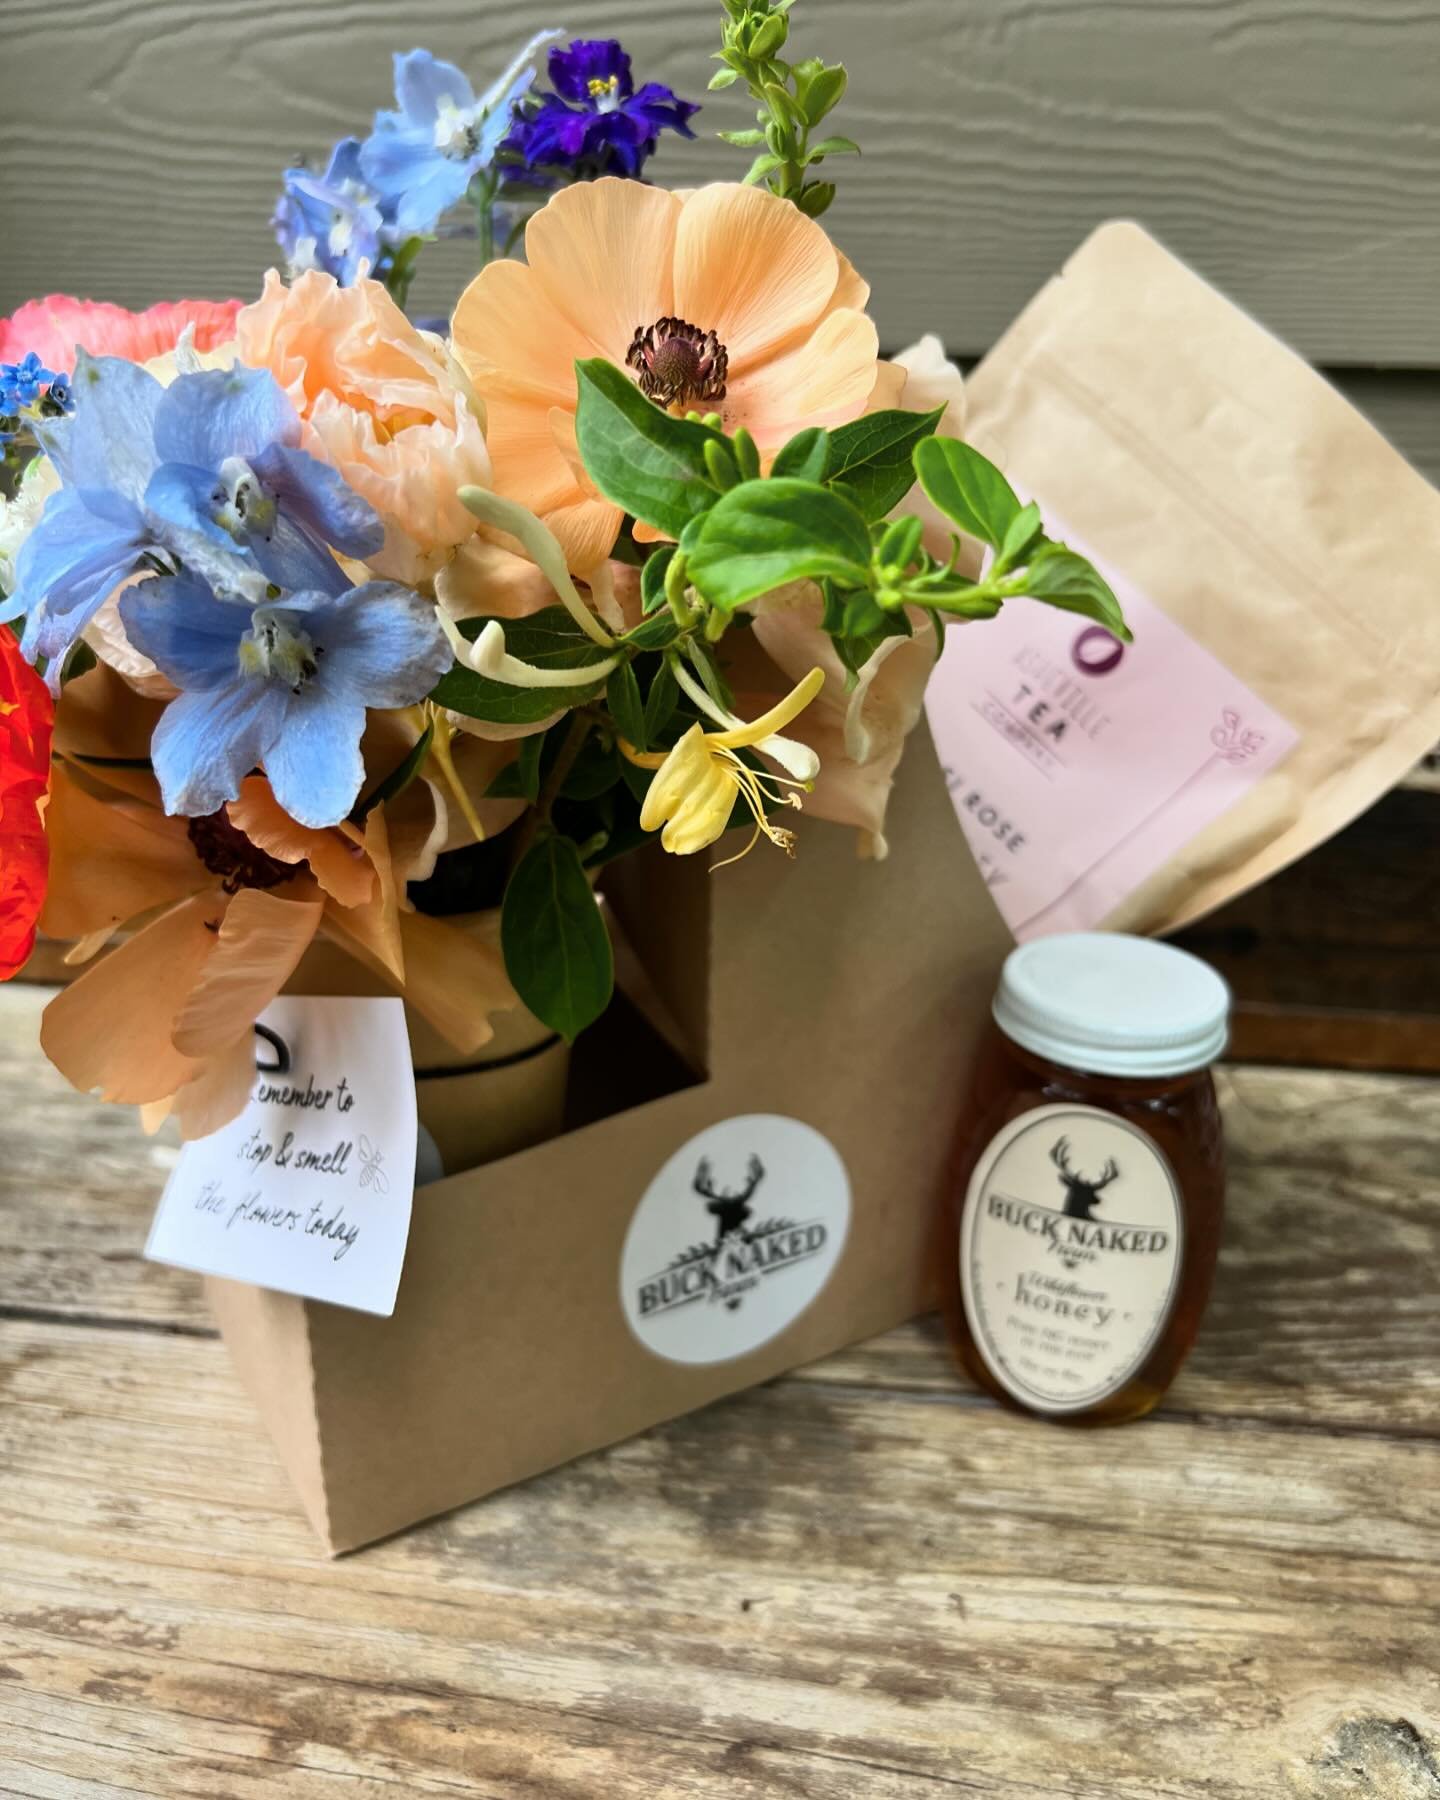 Special Mothers Day offer! Breakfast in bed - to go! A petite flower bouquet, rose scone mix and a jar of our wildflower honey in a cute little carrier. Bring it to Mom as is, or make the scones and add a cup of her favorite coffee drink to the carri